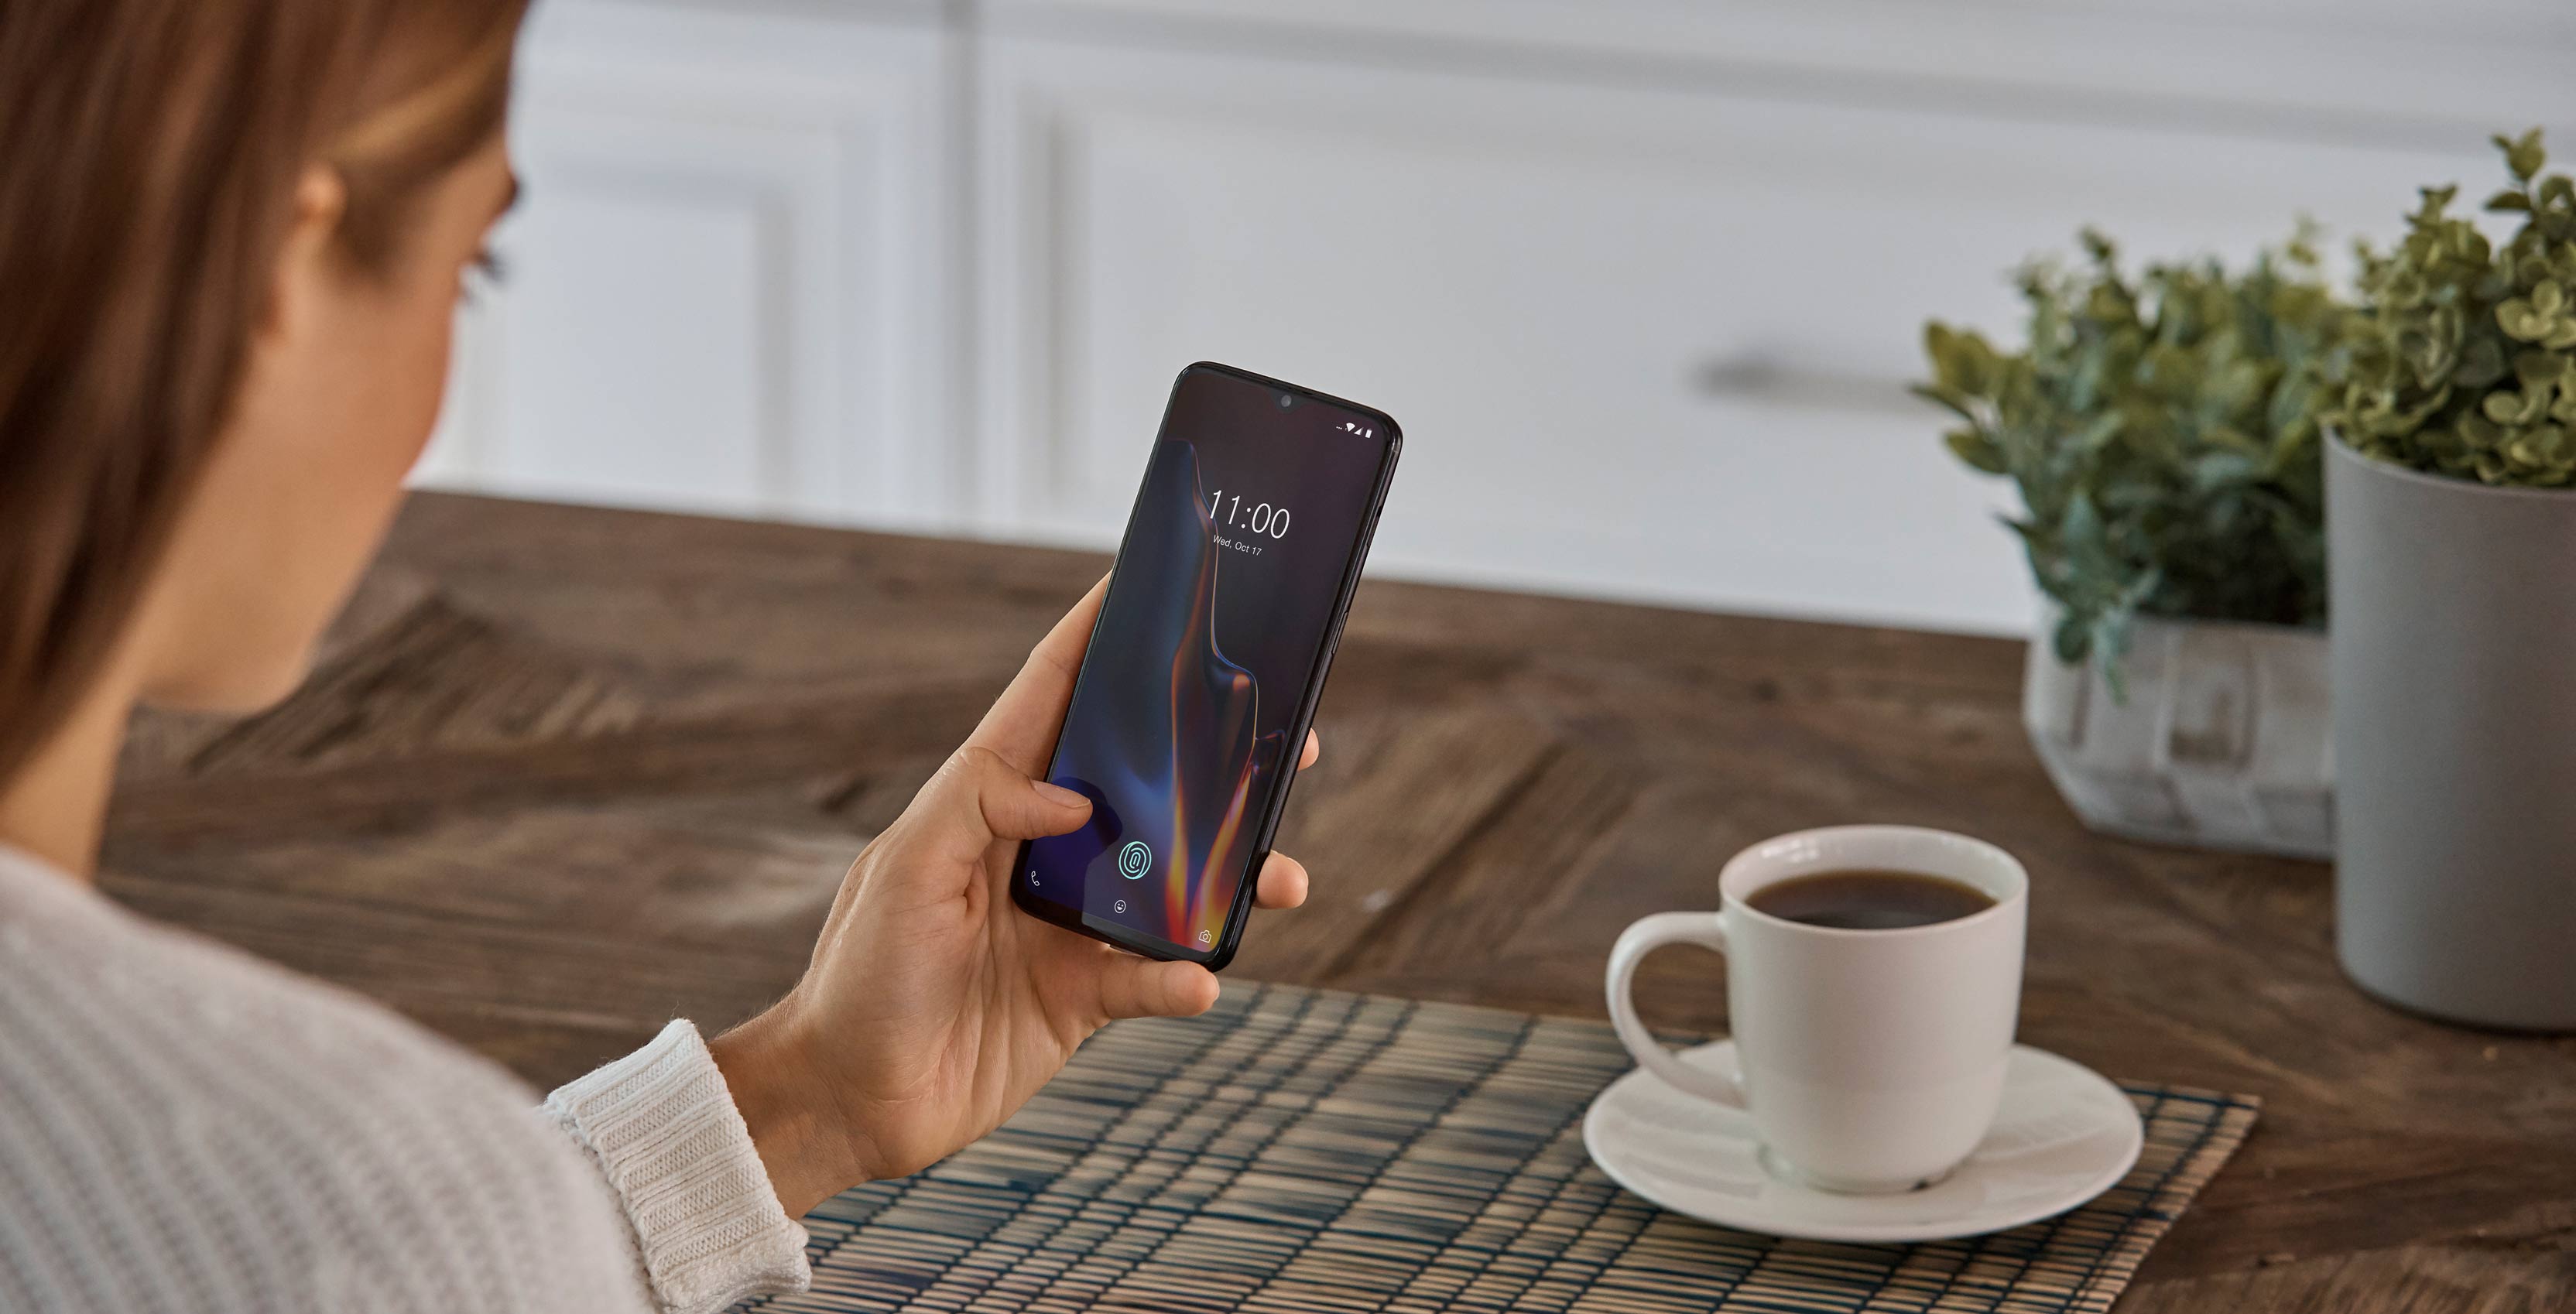 The OnePlus 6T features a new in-display fingerprint sensor